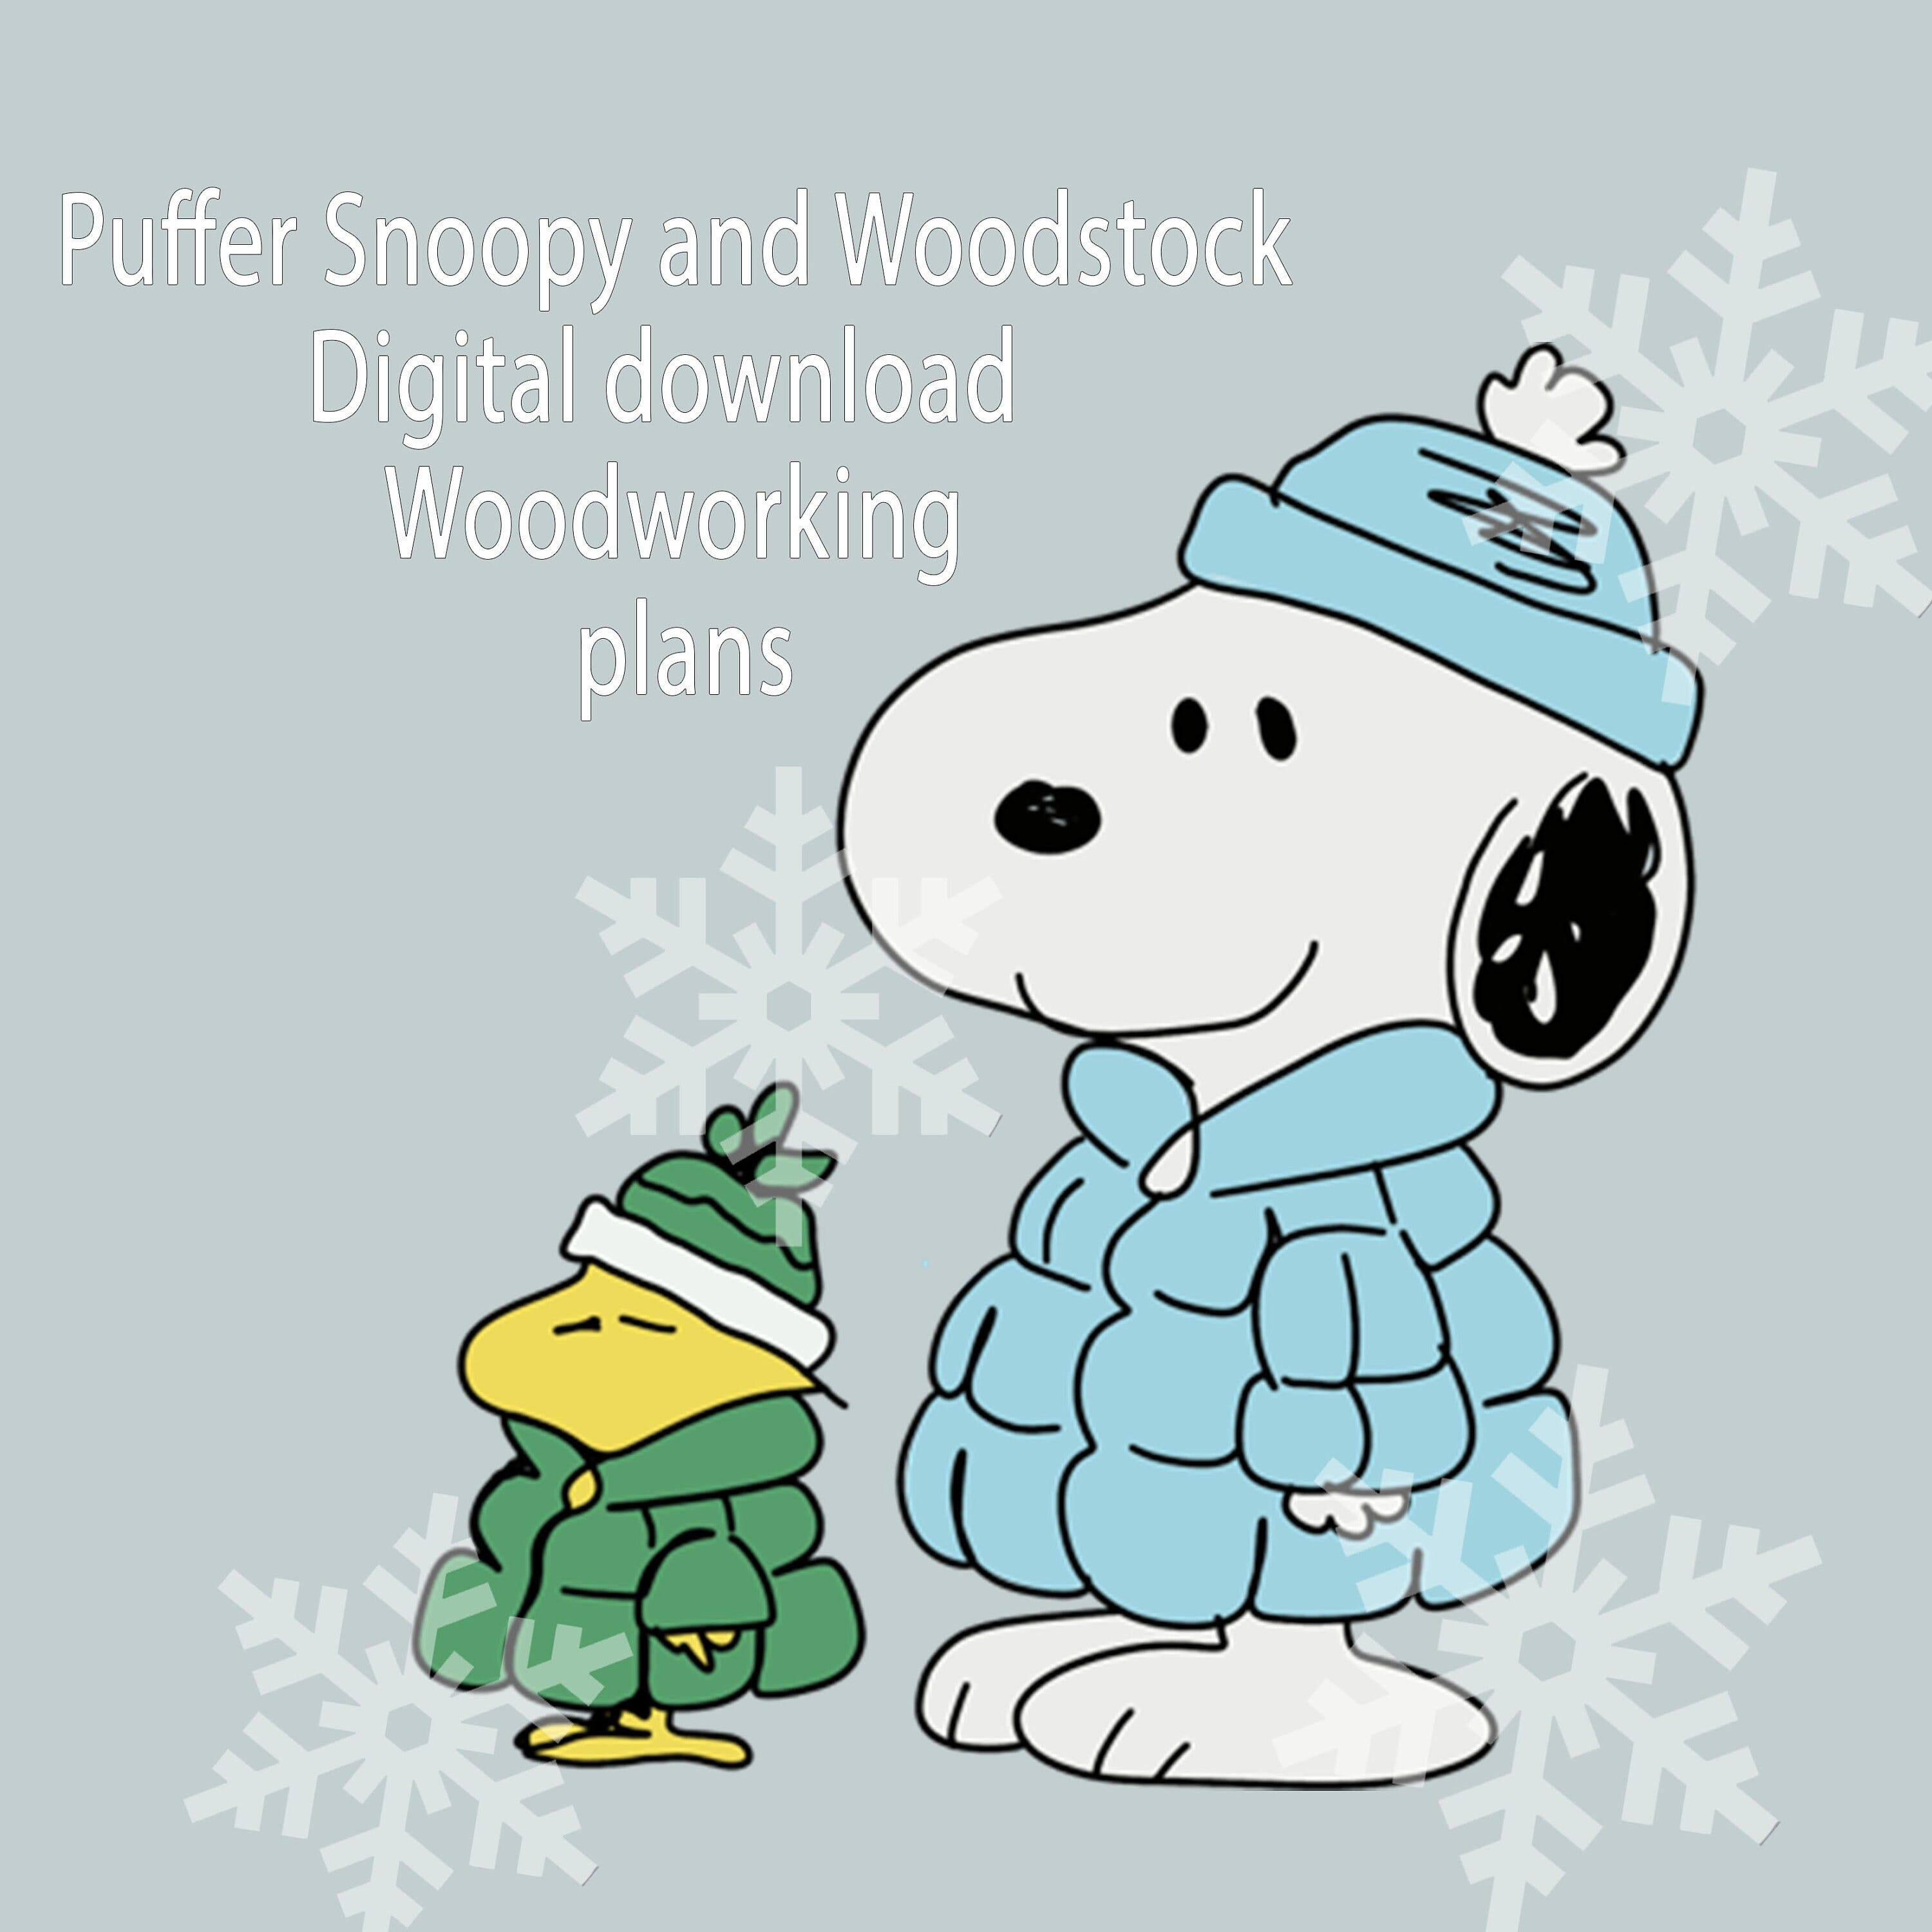 Puffer Snoopy and Woodstock Yard Cutout PDF Woodworking Plan